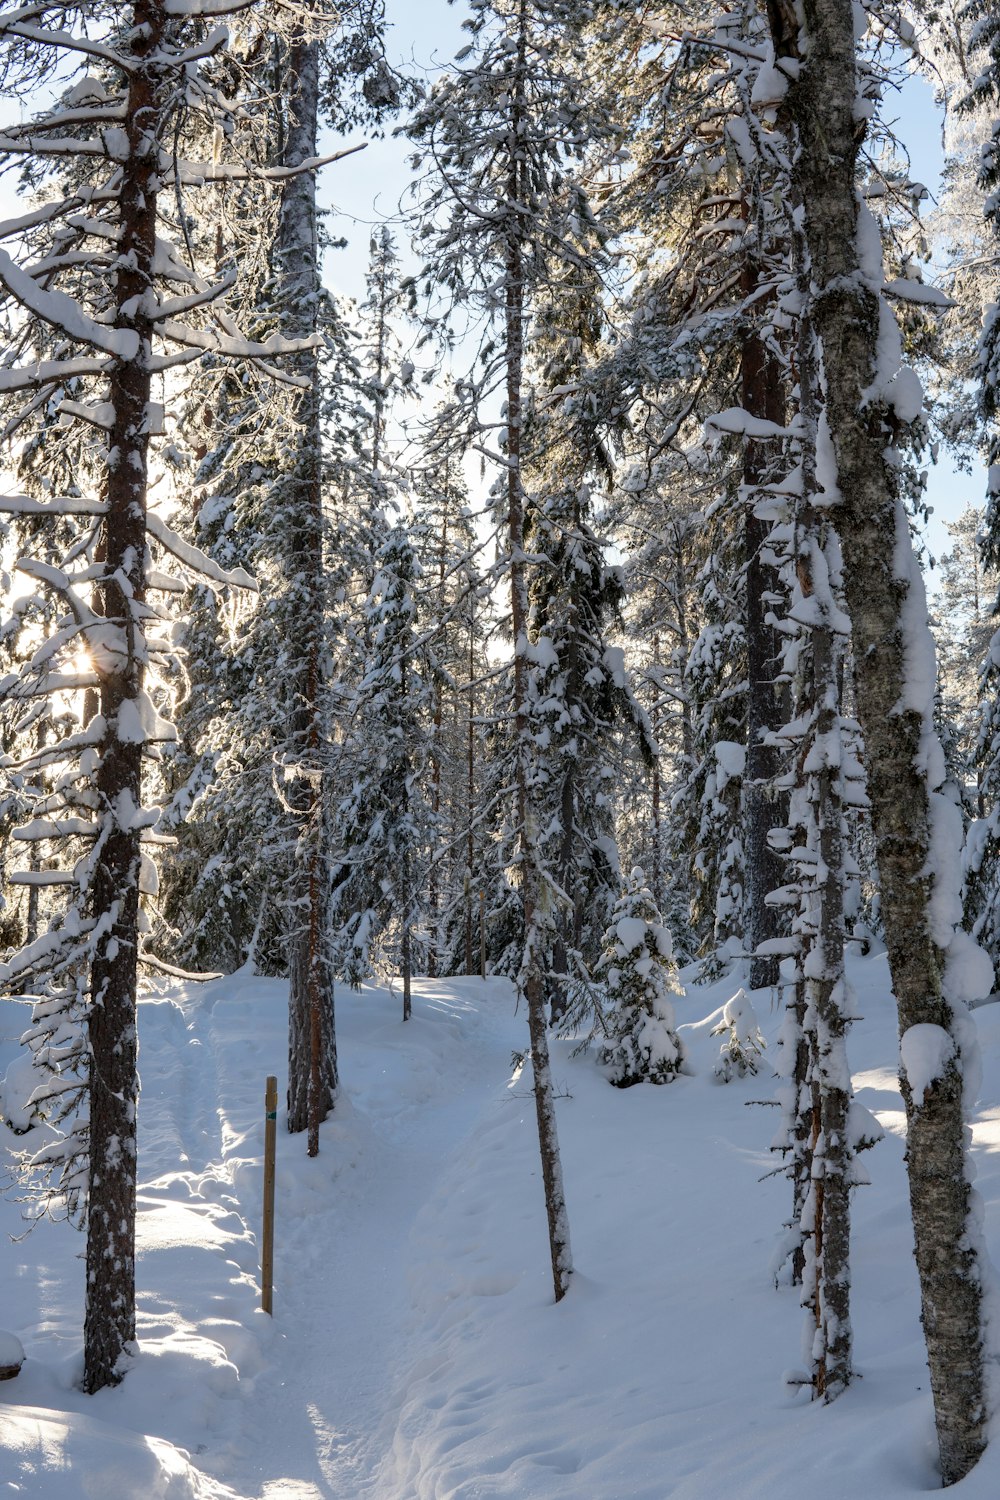 a person on skis in the snow in the woods